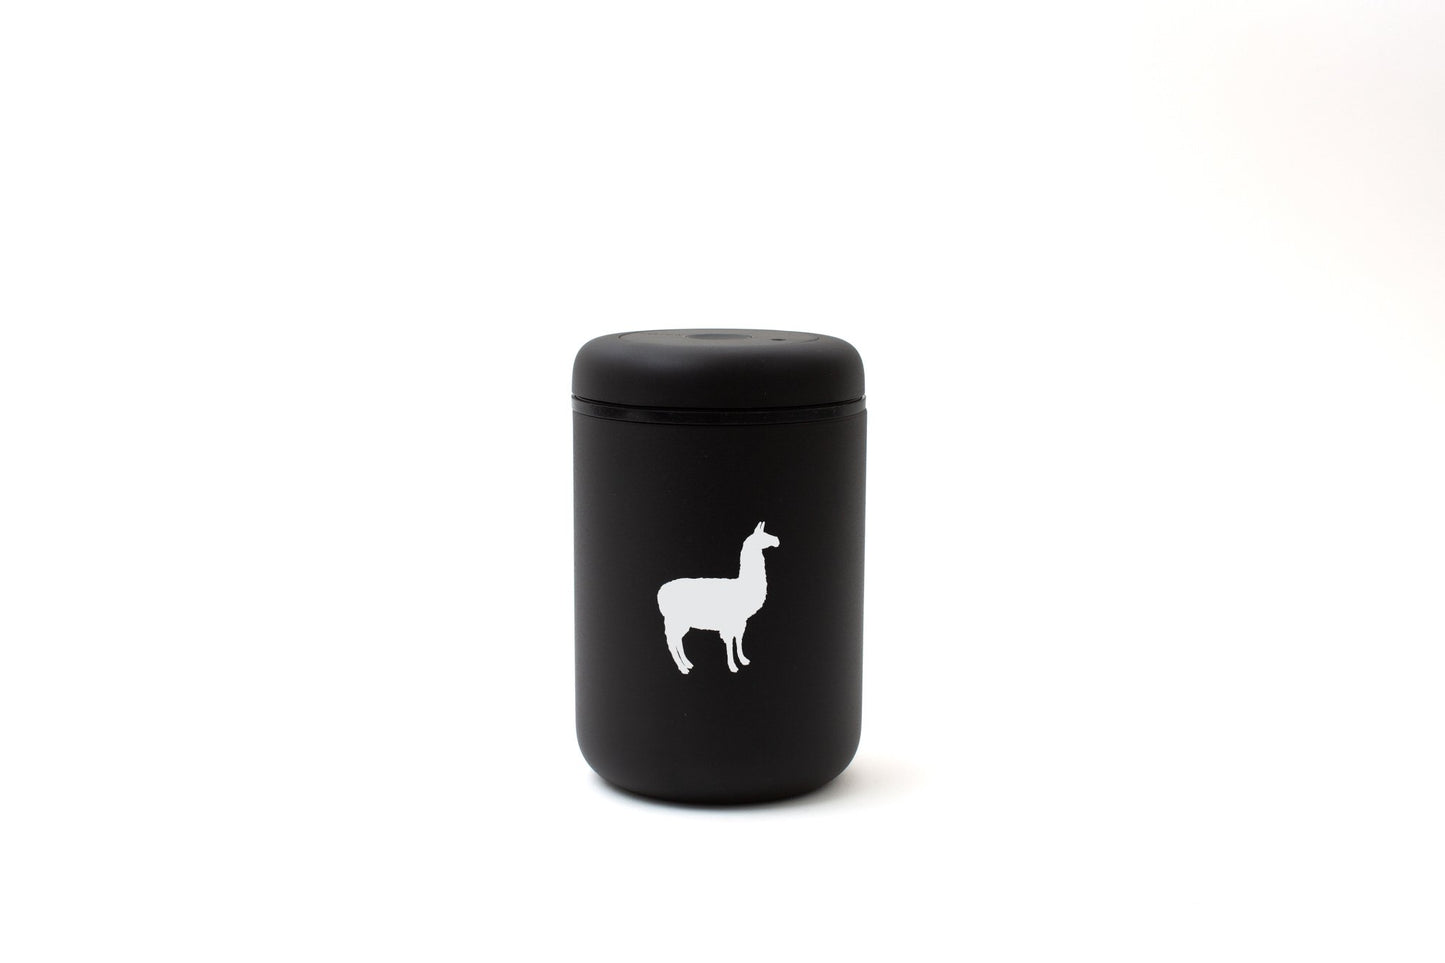 Image of Fellow Atmos Vacuum Canister with Llama